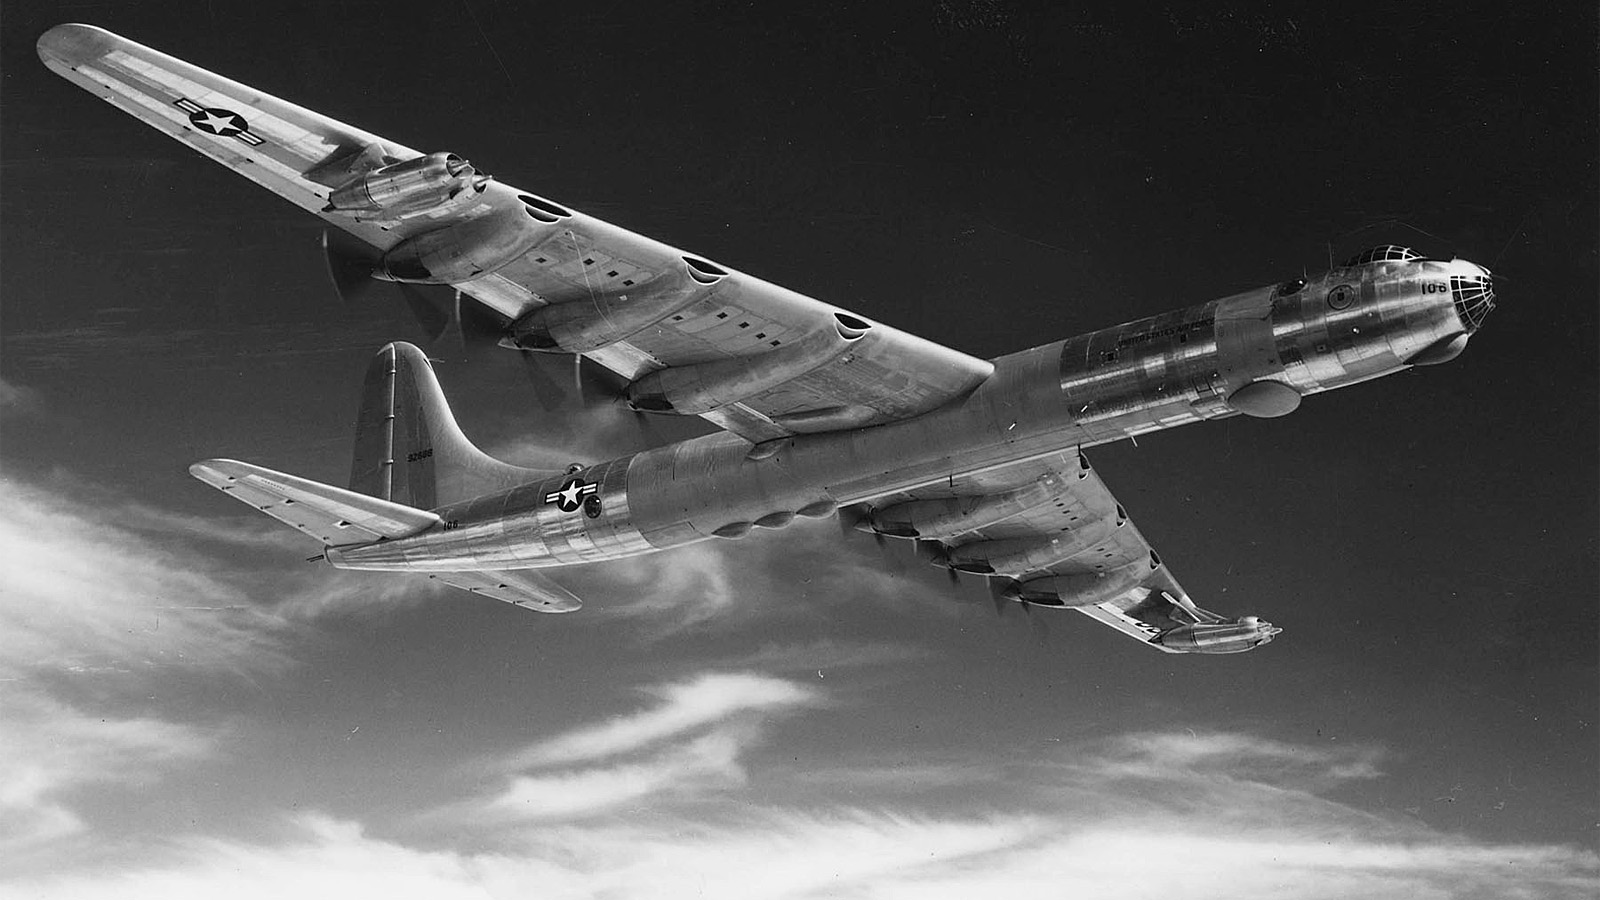 WATCH: SAC's Movie Made to Introduce the B-36 Peacemaker to the Reds!